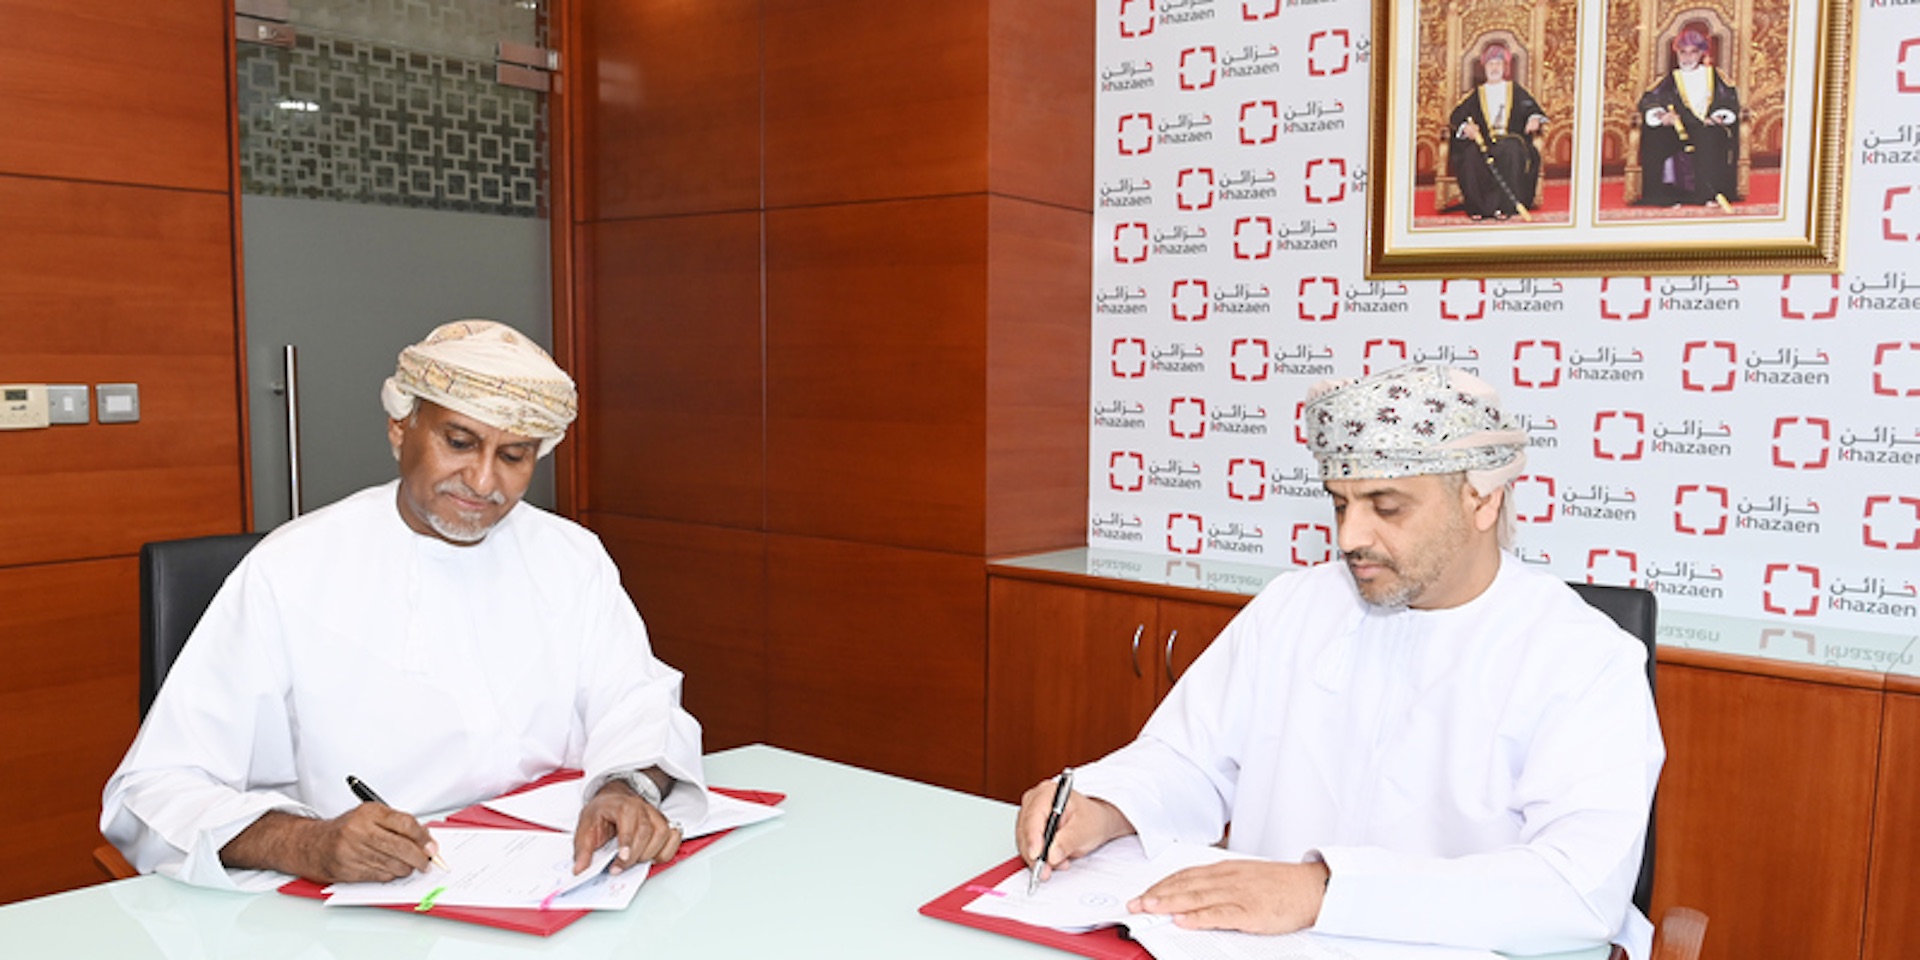 Vaccine factory to be built in Khazaen City, Oman worth RO 20 million